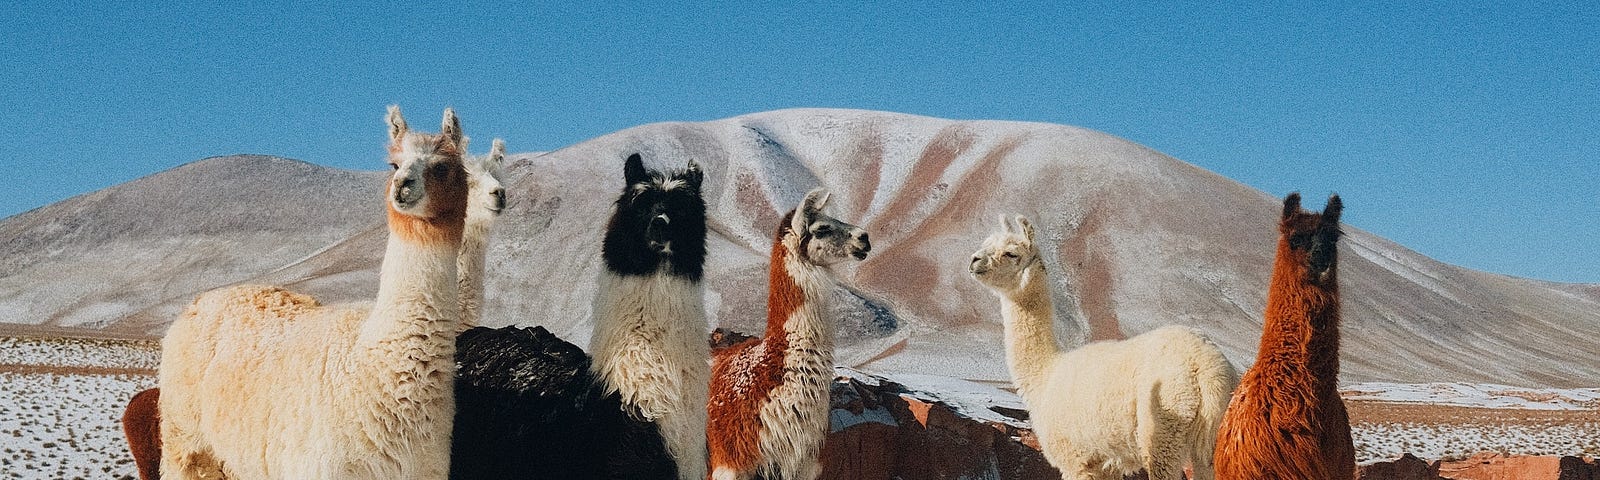 Five llamas on a snowy plain with a mountain in the background.